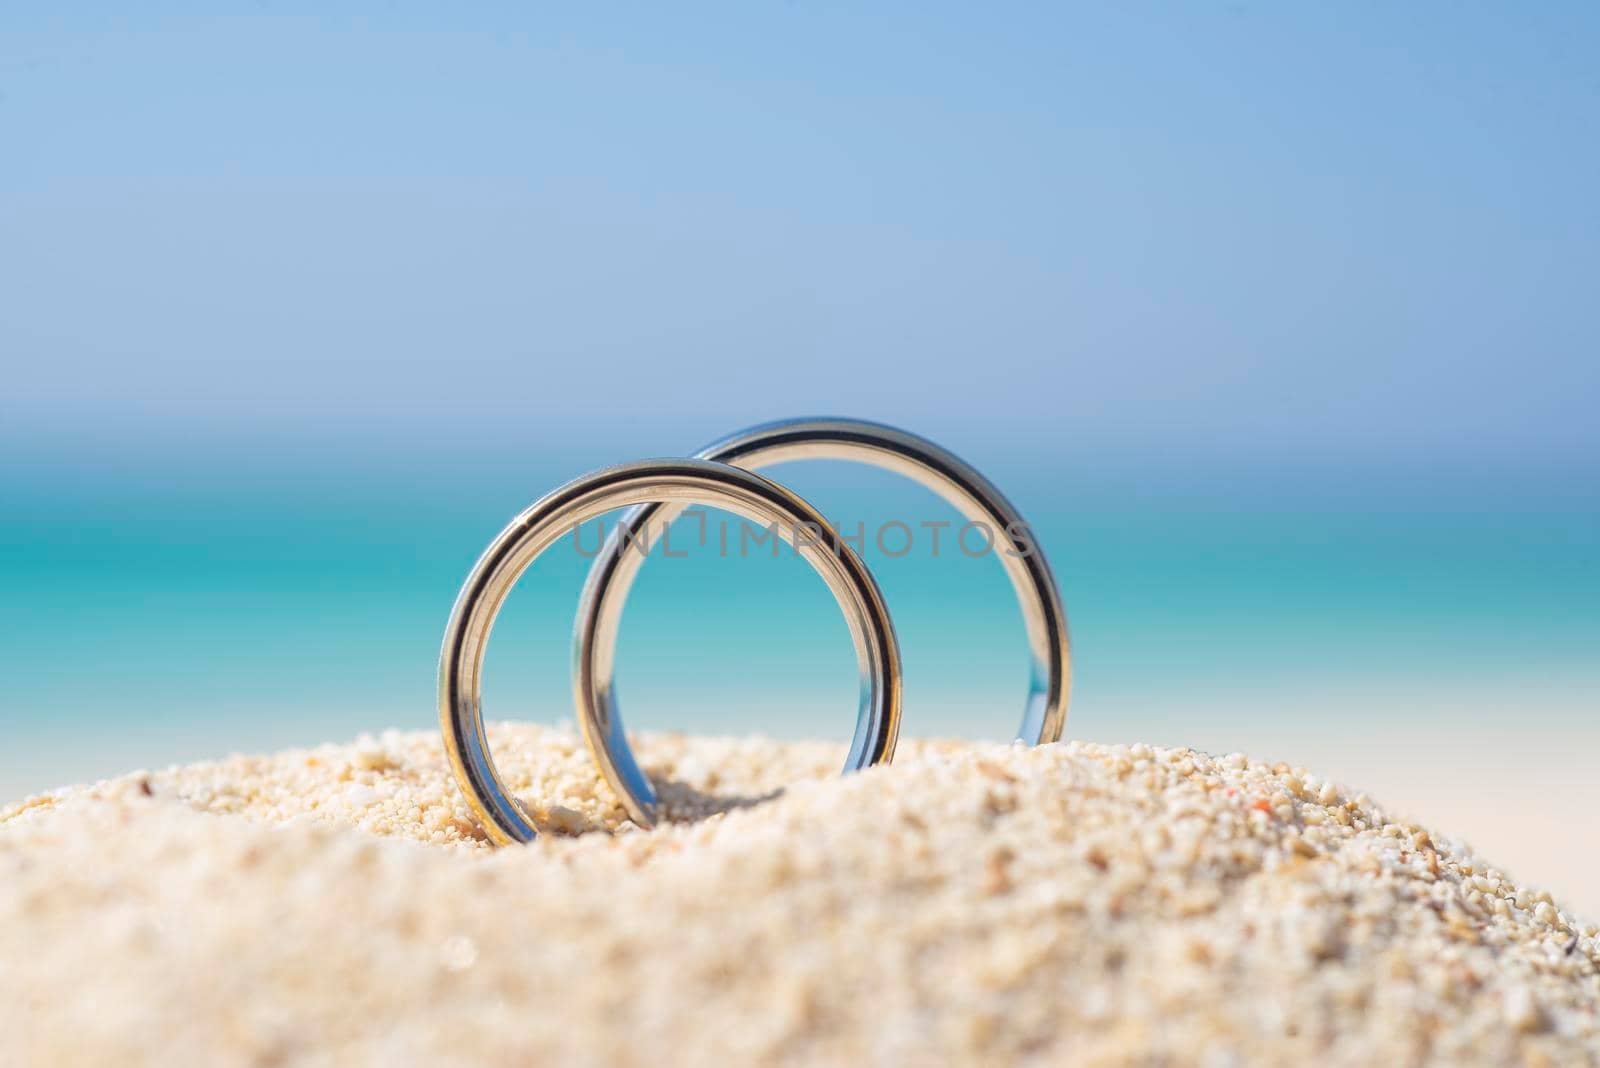 Pair of white gold wedding ring bands jewelry in sand on tropical desert island beach during summer with blue ocean background